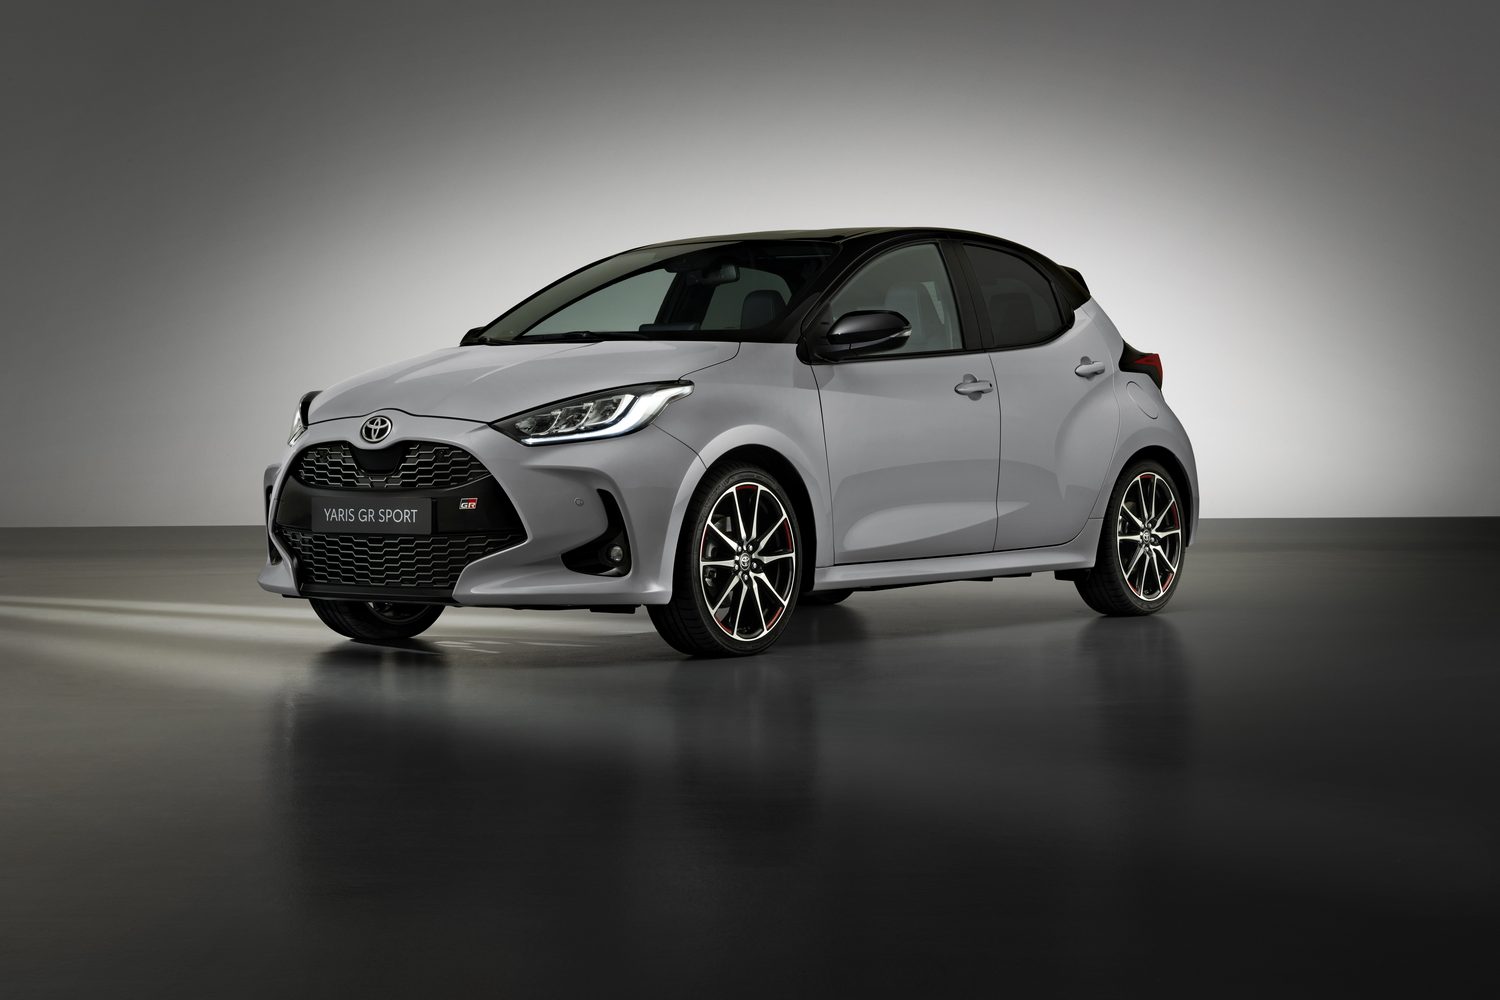 Car News | Toyota Yaris GR Sport coming to Ireland | CompleteCar.ie